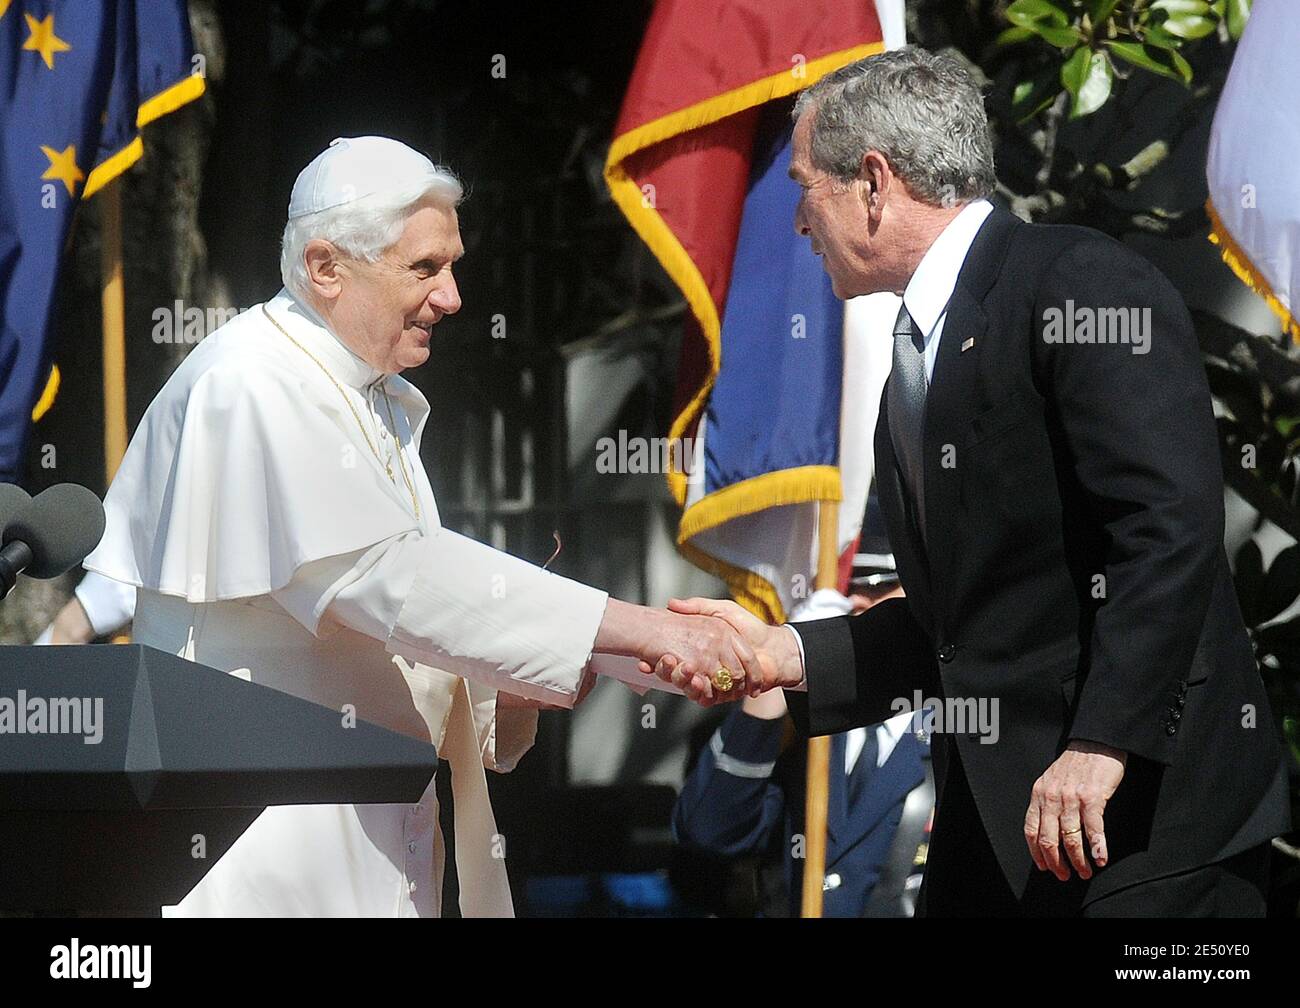 Pope Benedict XVI (L) and U.S. President George W. Bush stand on stage during an arrival ceremony on the south lawn of the White House April 16, 2008 in Washington, DC, USA. Today is the second day of the Pope's visit to the United States. Photo by Olivier Douliery /ABACAPRESS.COM Stock Photo